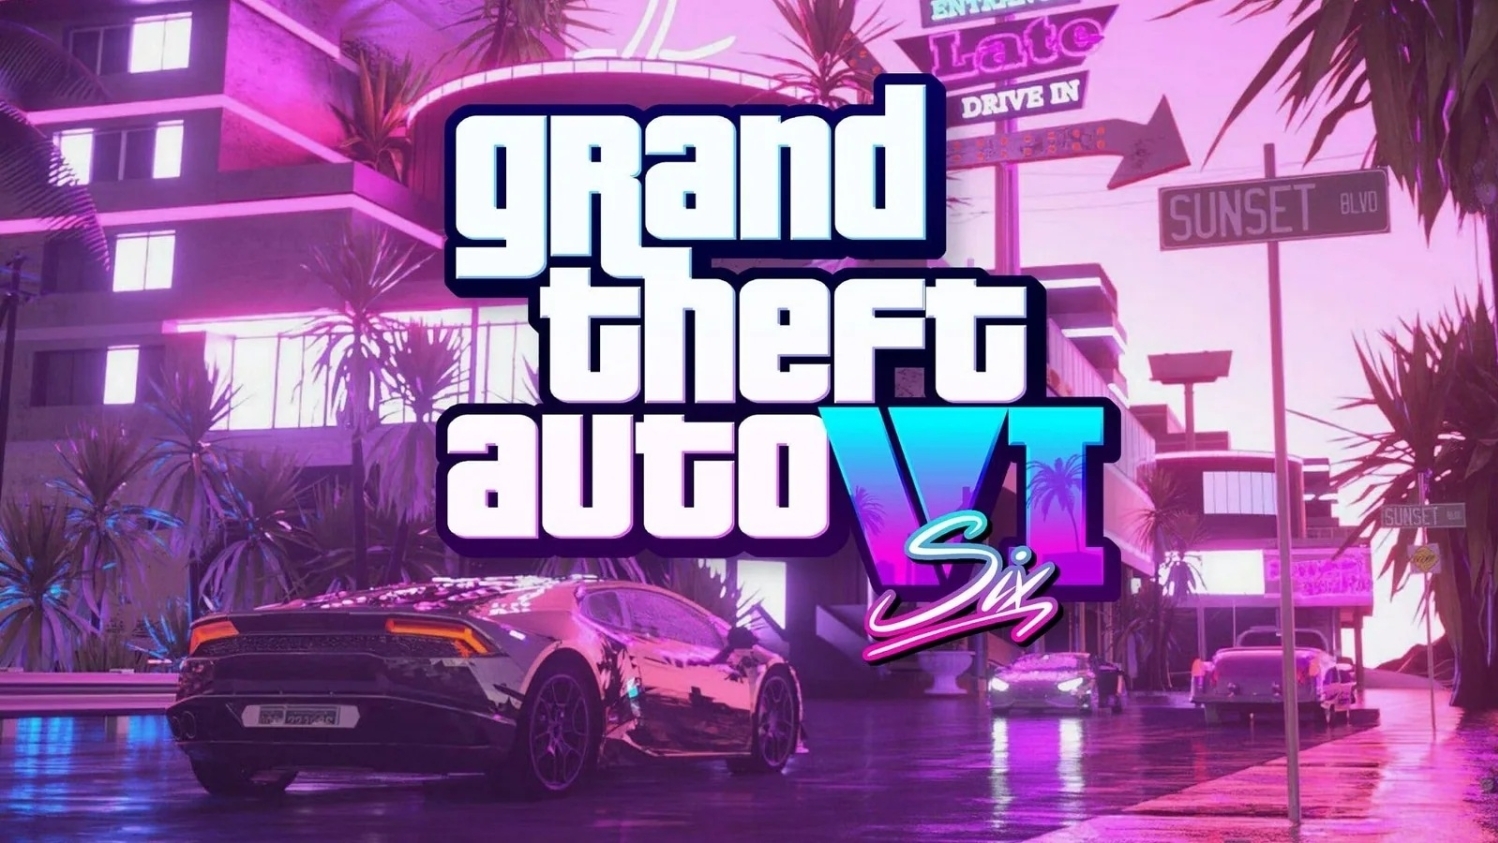 Grand Theft Auto trailer 'is on track' to be the most watched